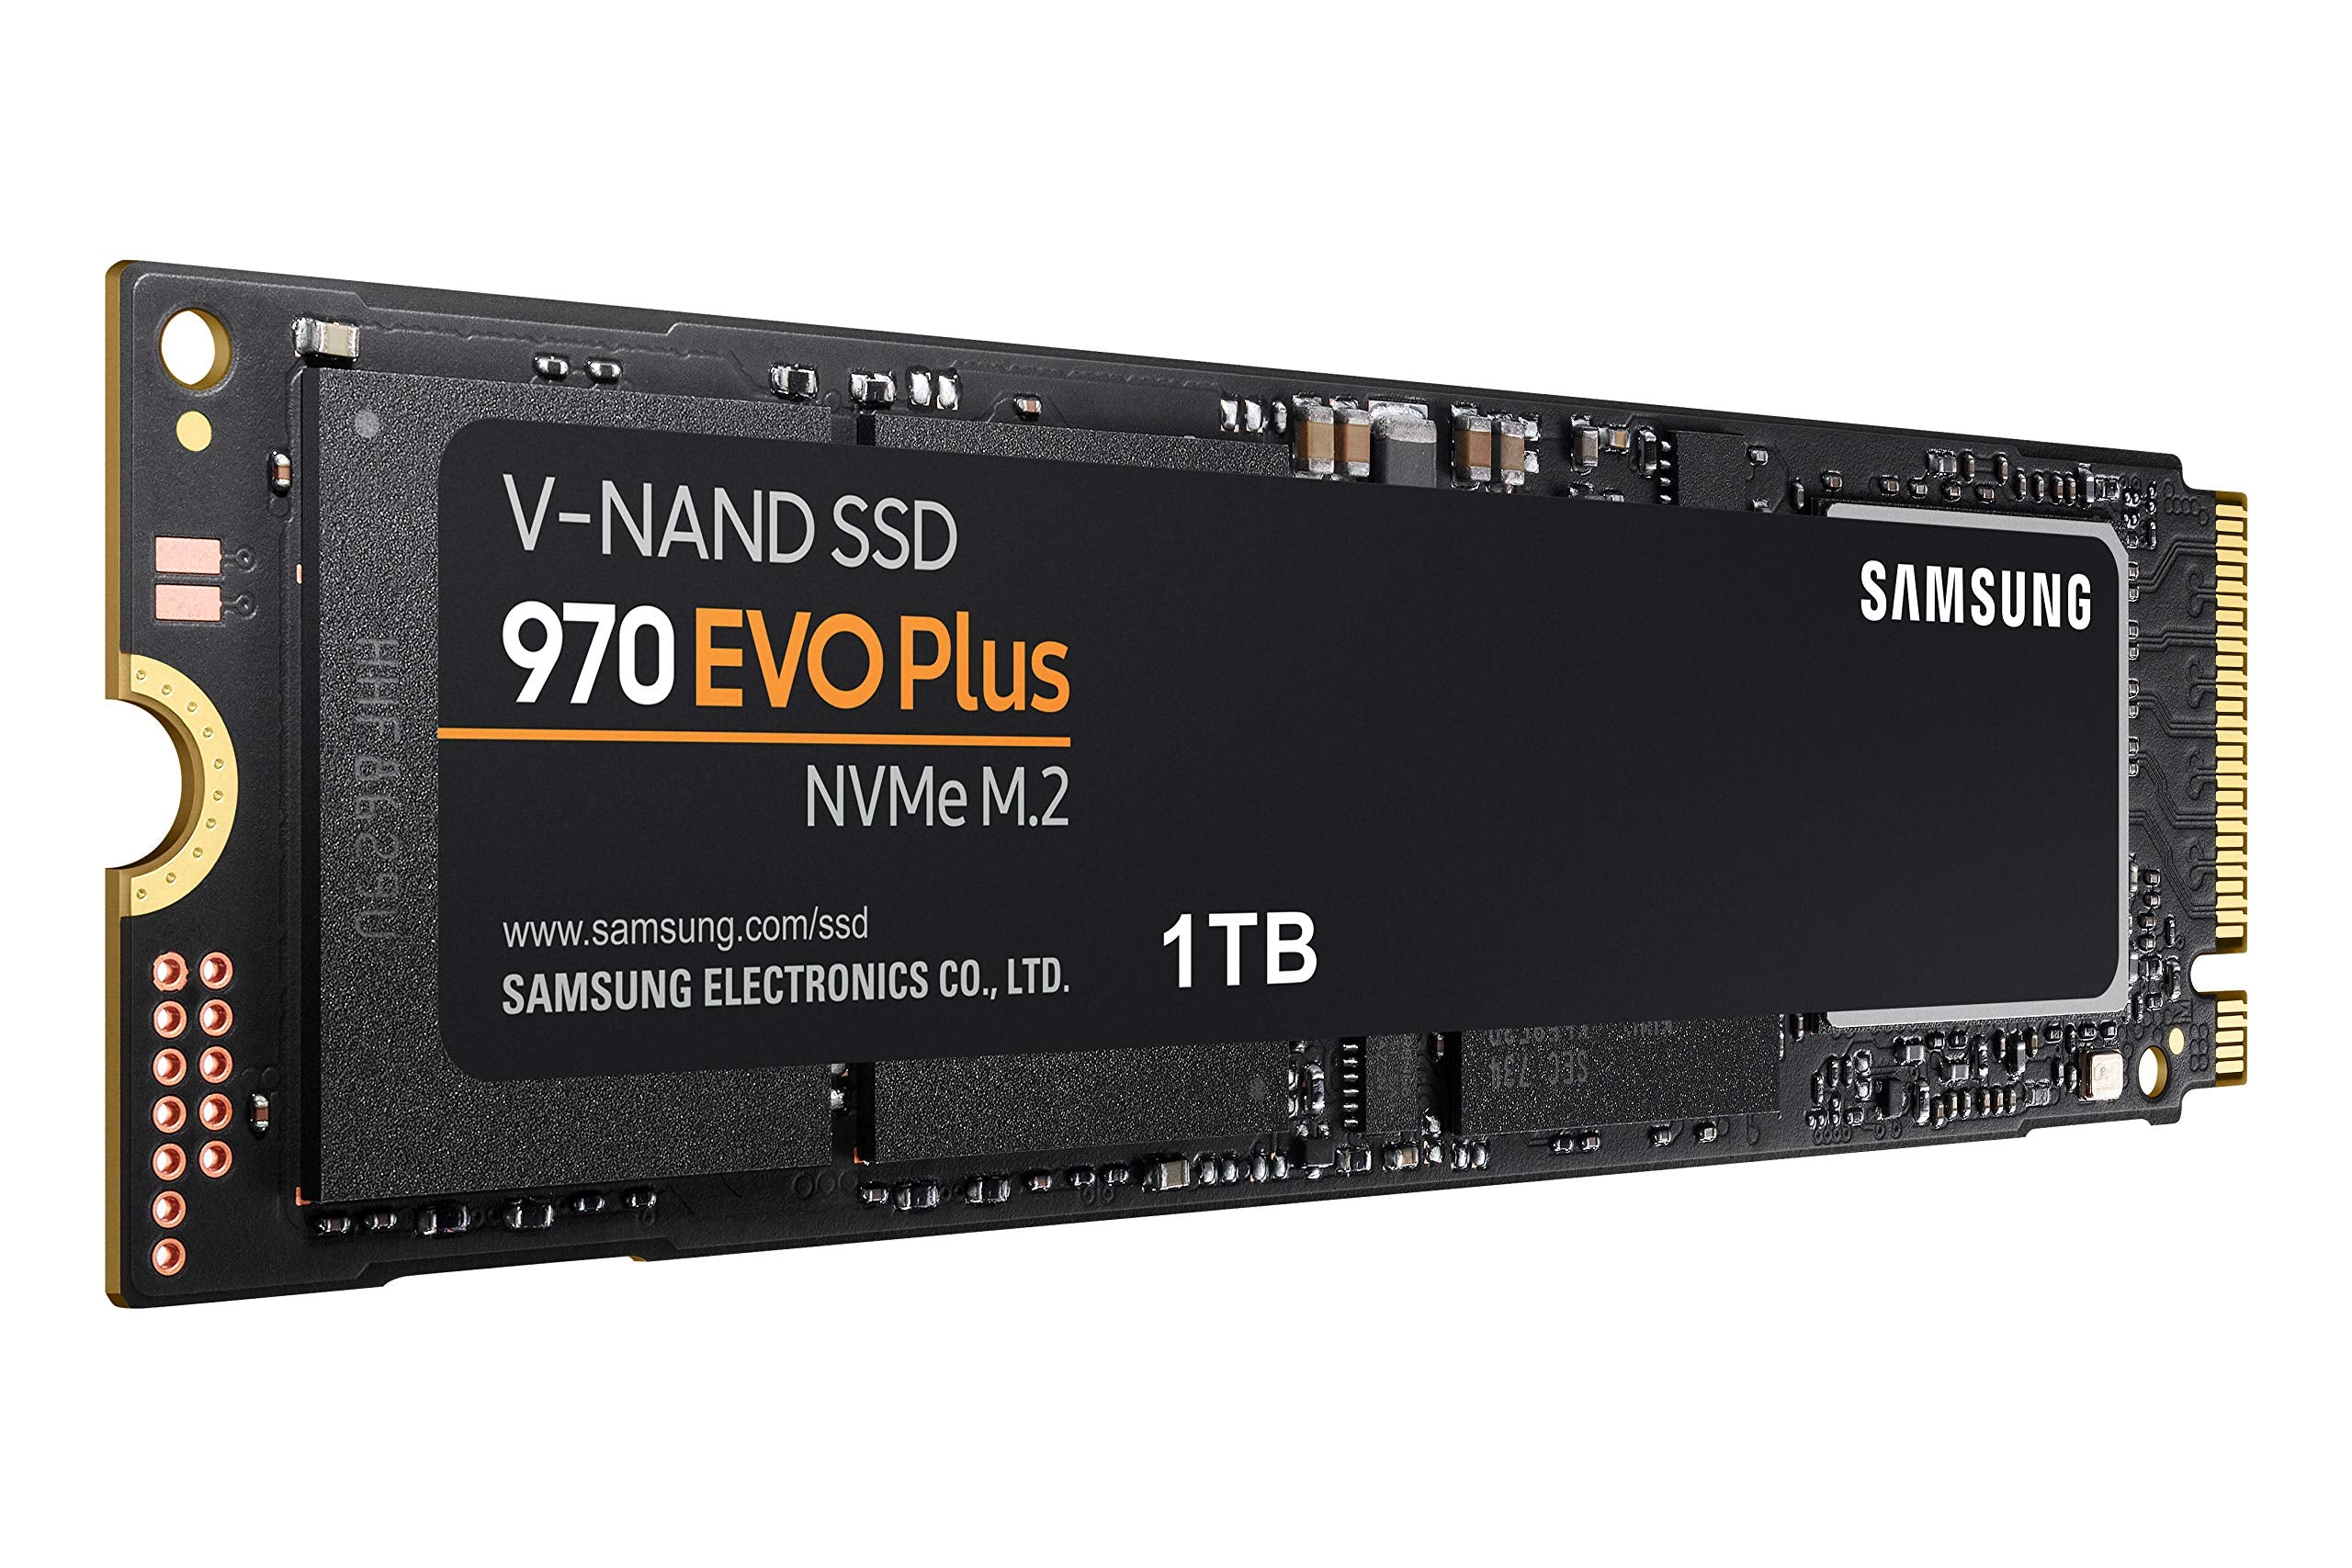 SAMSUNG 970 EVO Plus SSD 1TB NVMe M.2 Internal Solid State Drive w/ V-NAND Technology, Storage and Memory Expansion for Gaming, Graphics w/ Heat Control, Max Speed, MZ-V7S1T0B/AM